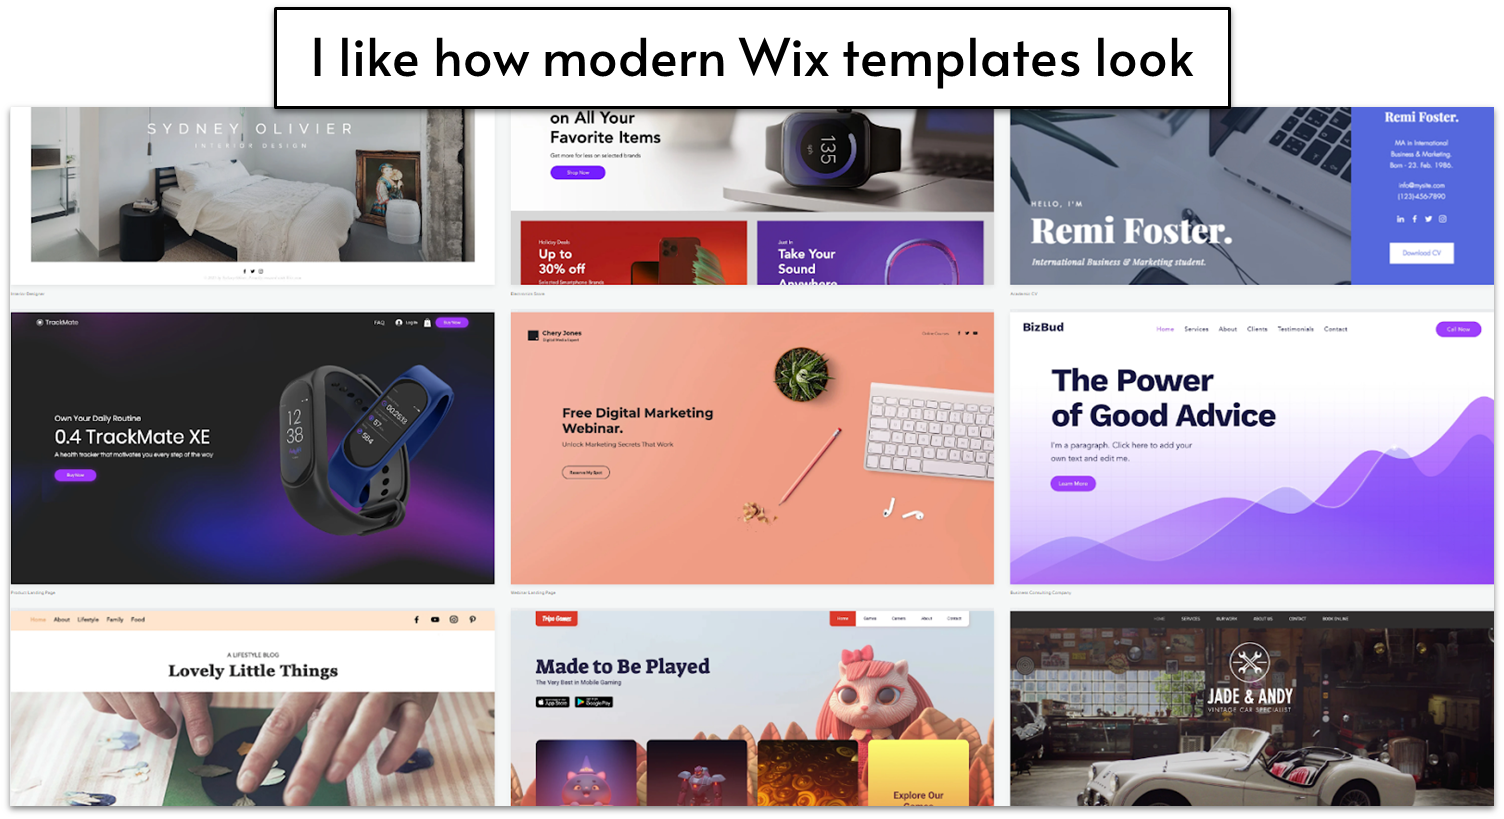 Some of the templates in the Wix library